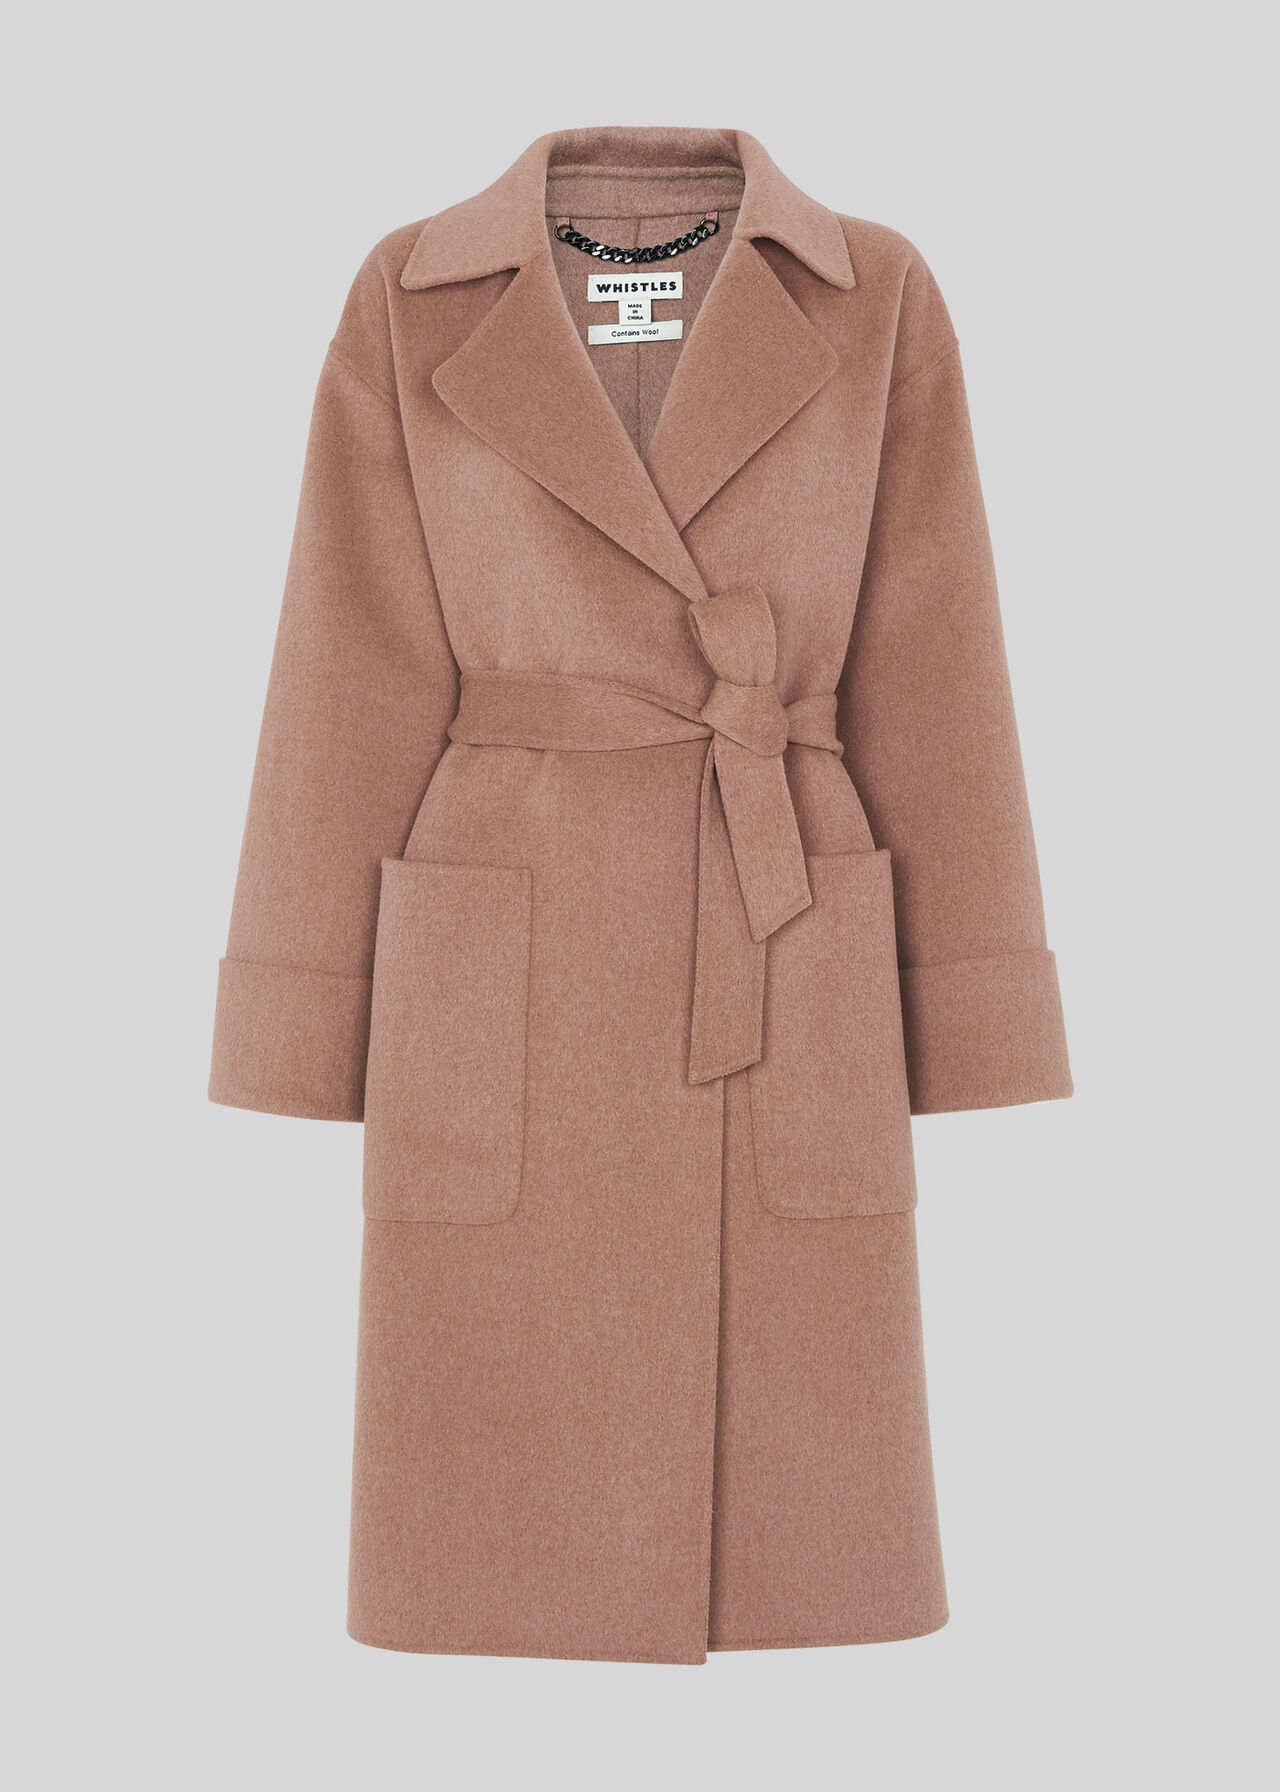 Pale Pink Double Faced Wool Wrap Coat | Whistles |